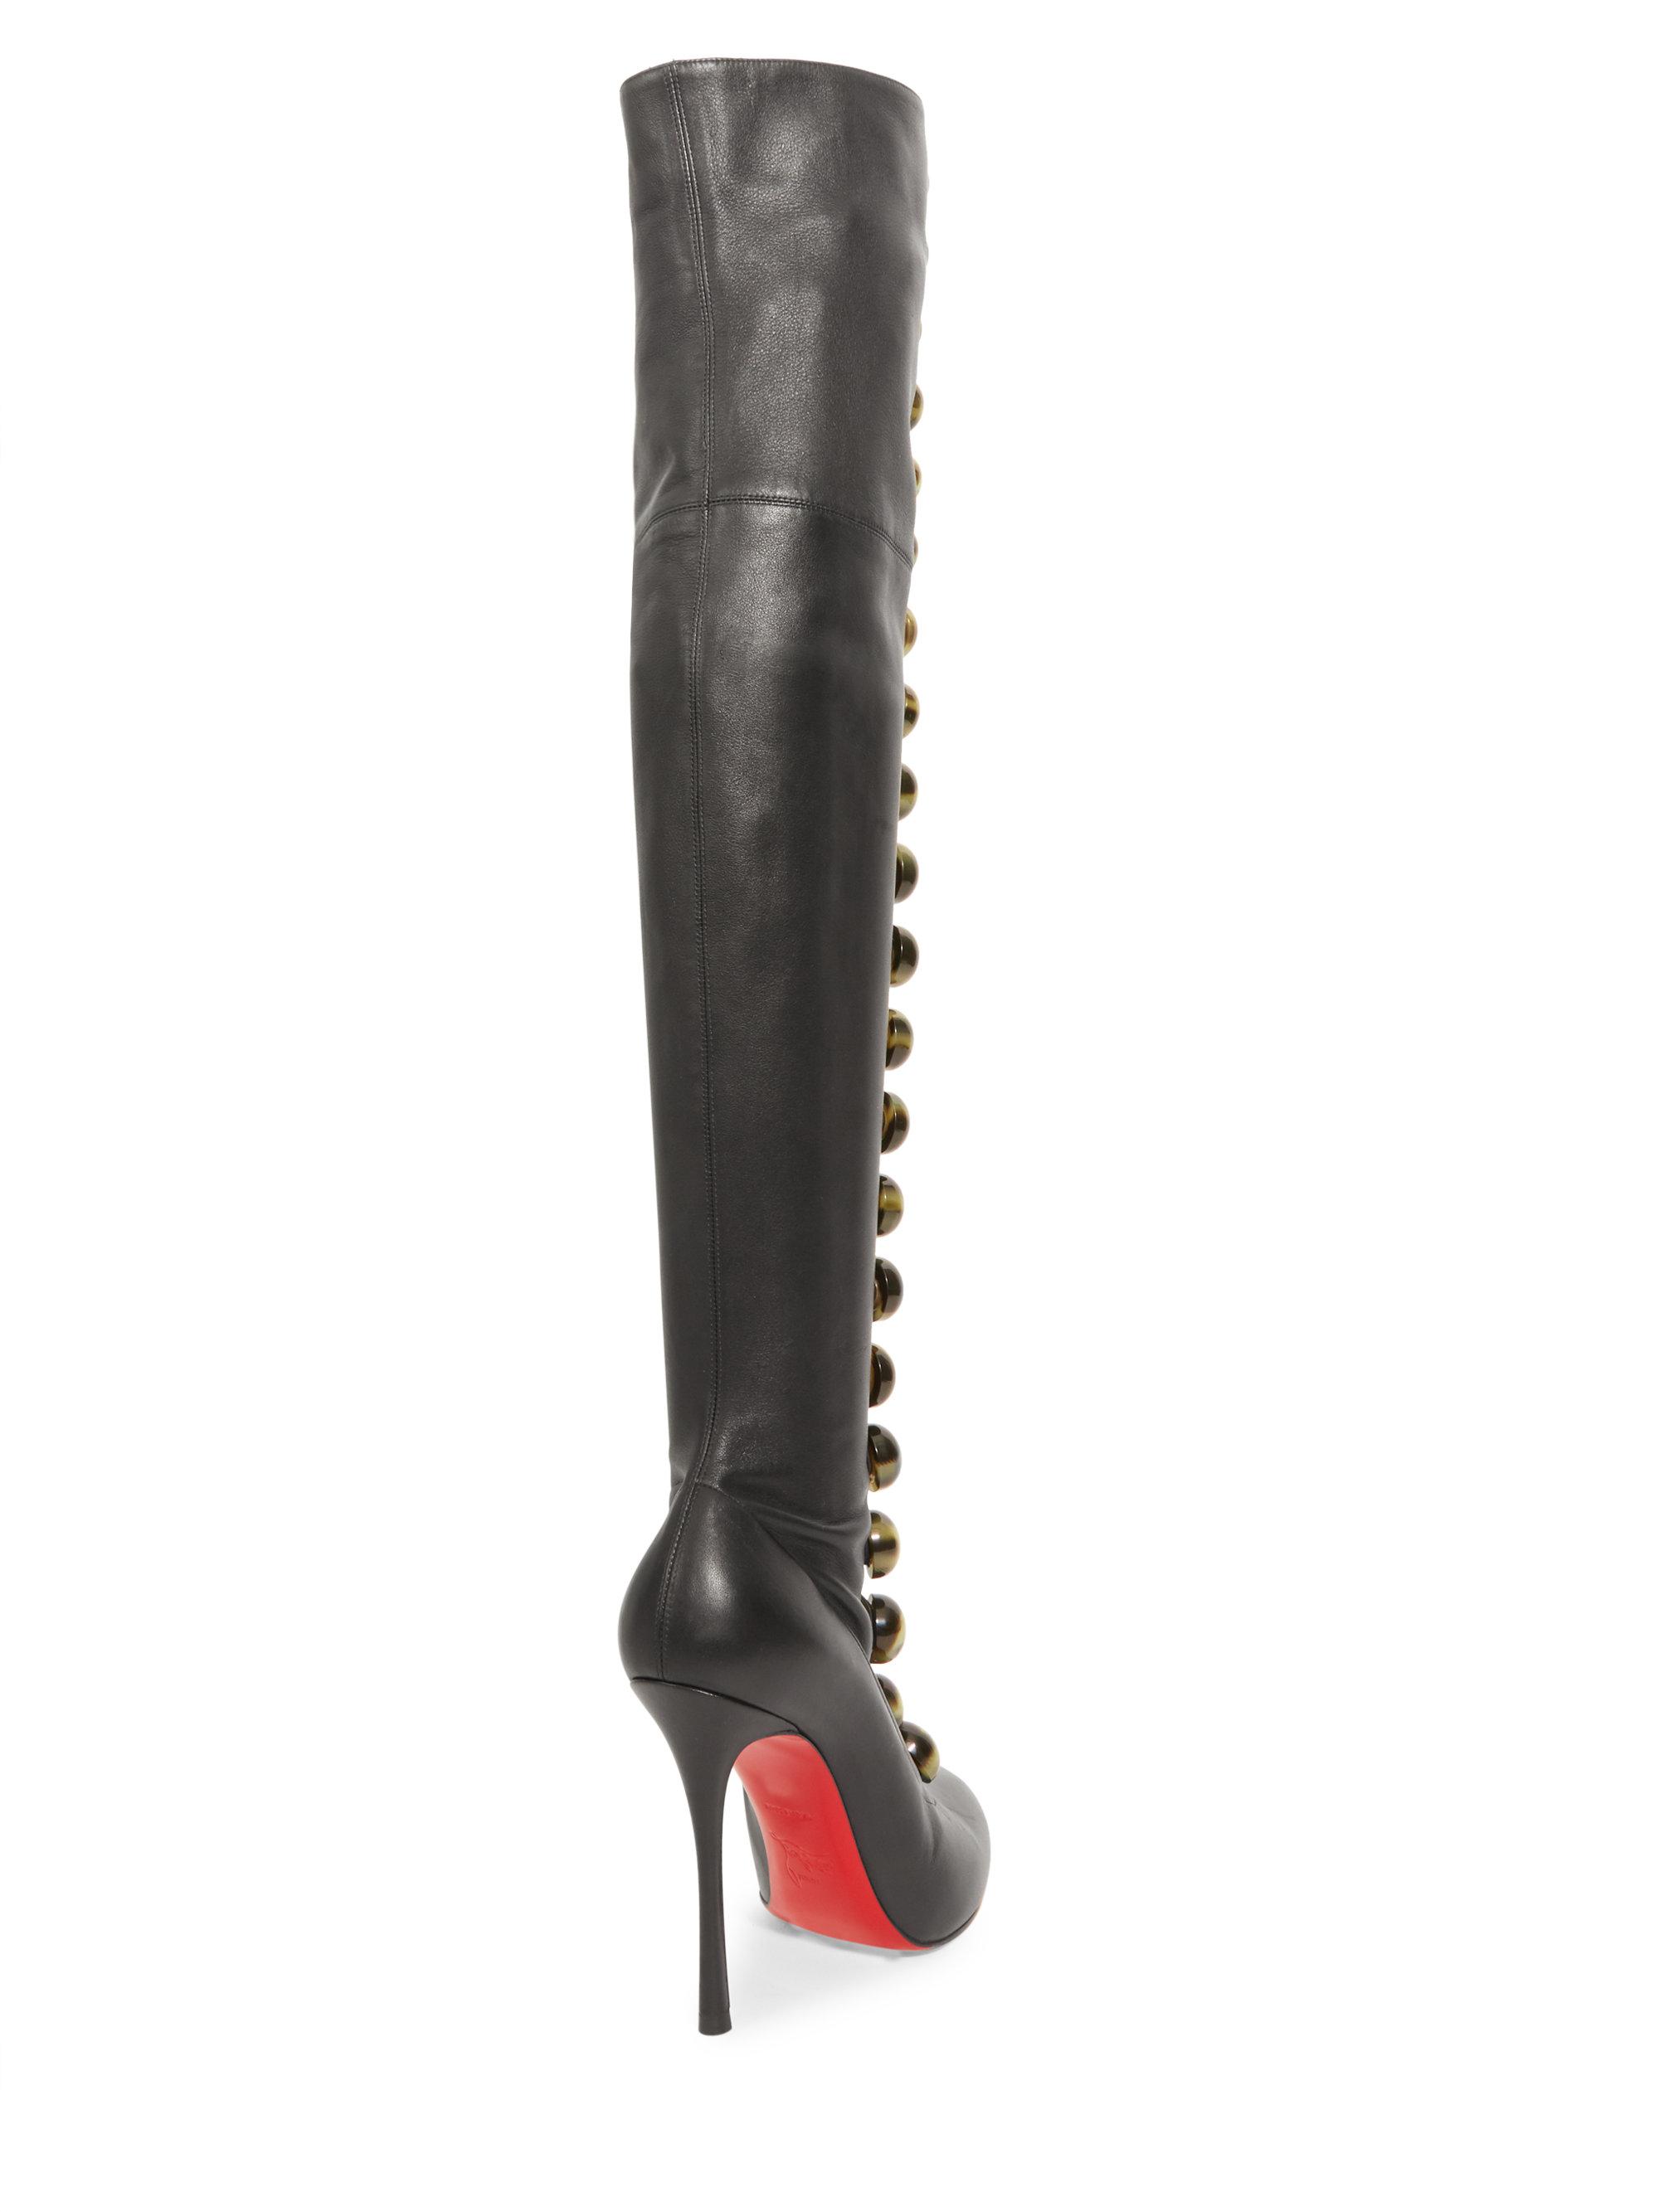 christian louboutin thigh high leather boots